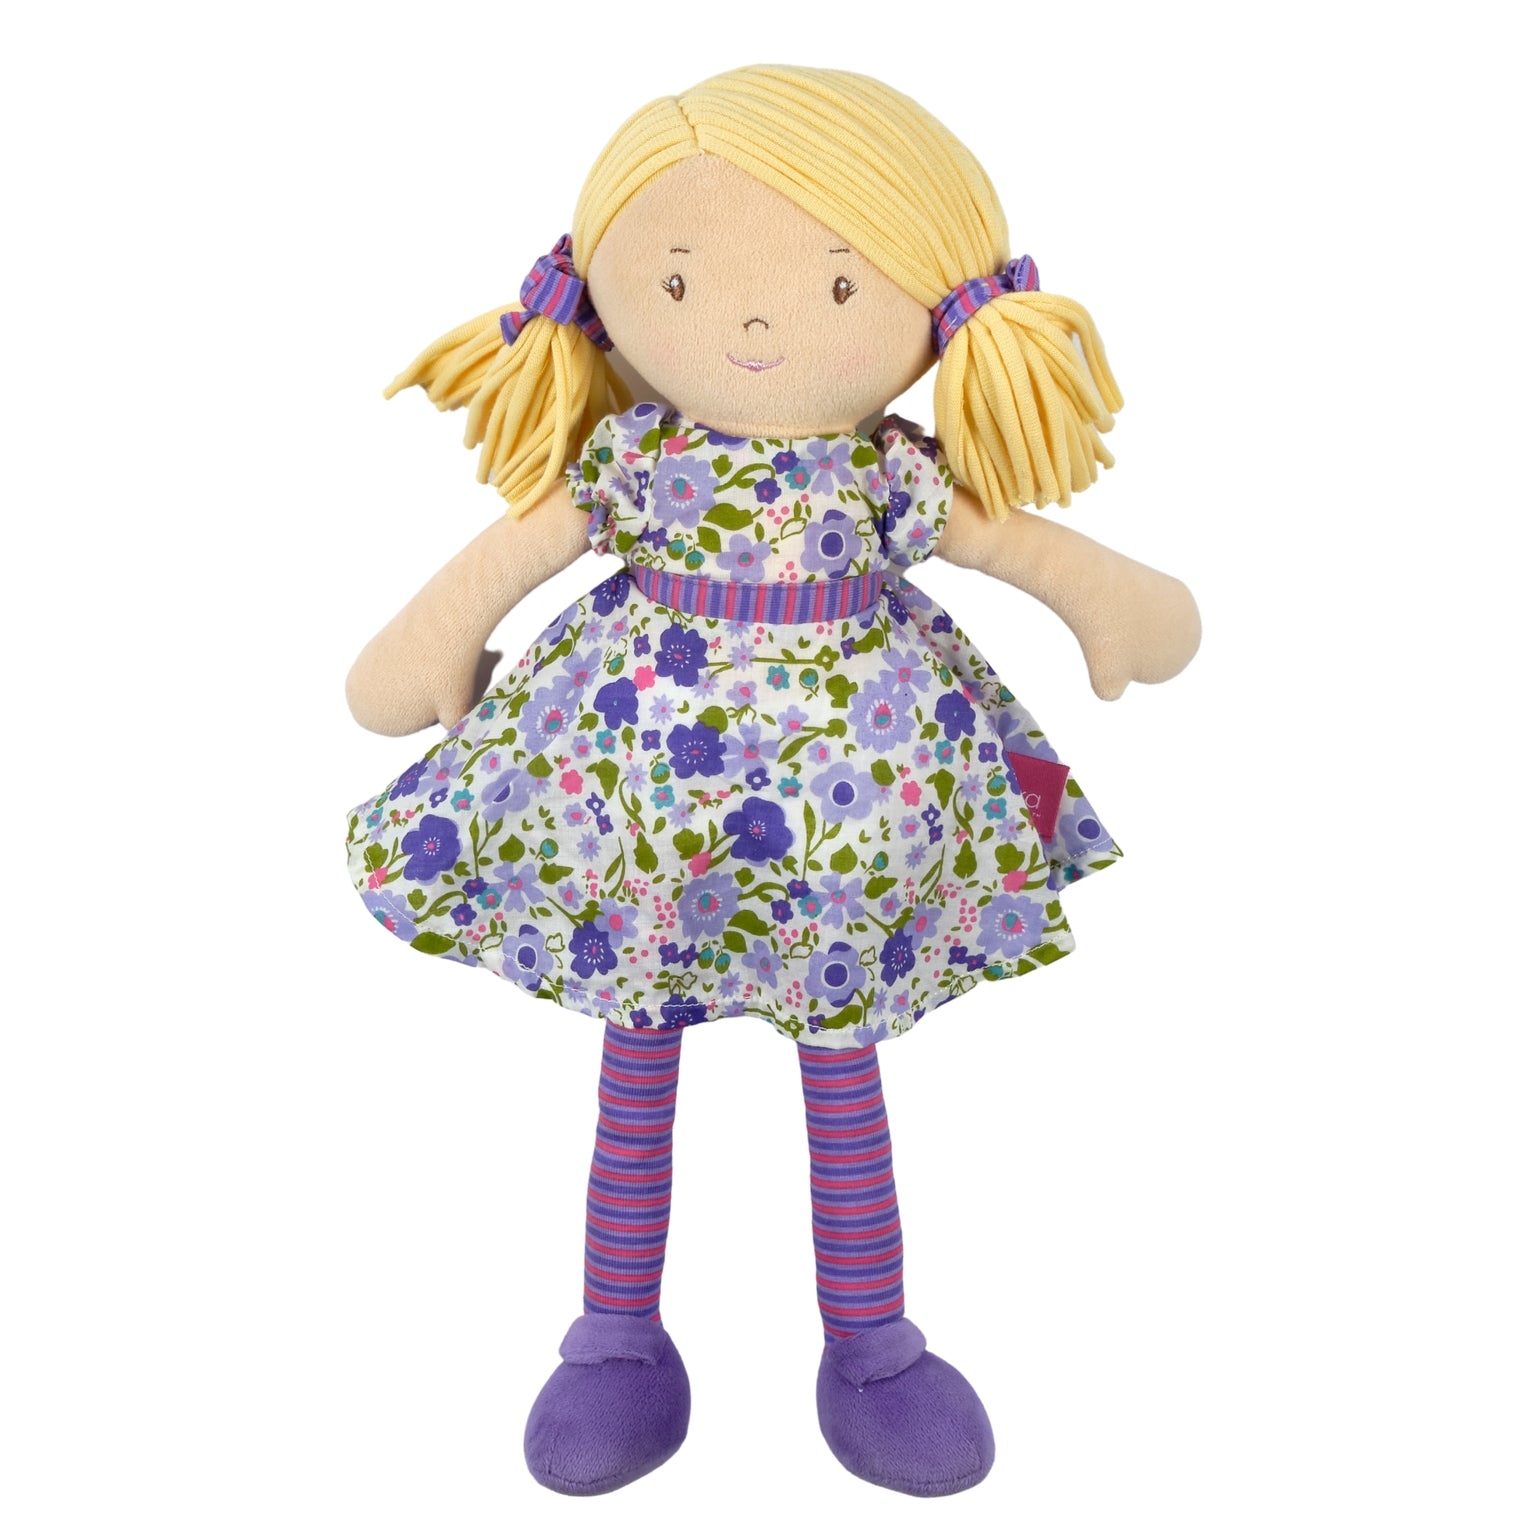 Peggy Blonde Hair with Lilac and Pink Dress - Twinkle Twinkle Little One